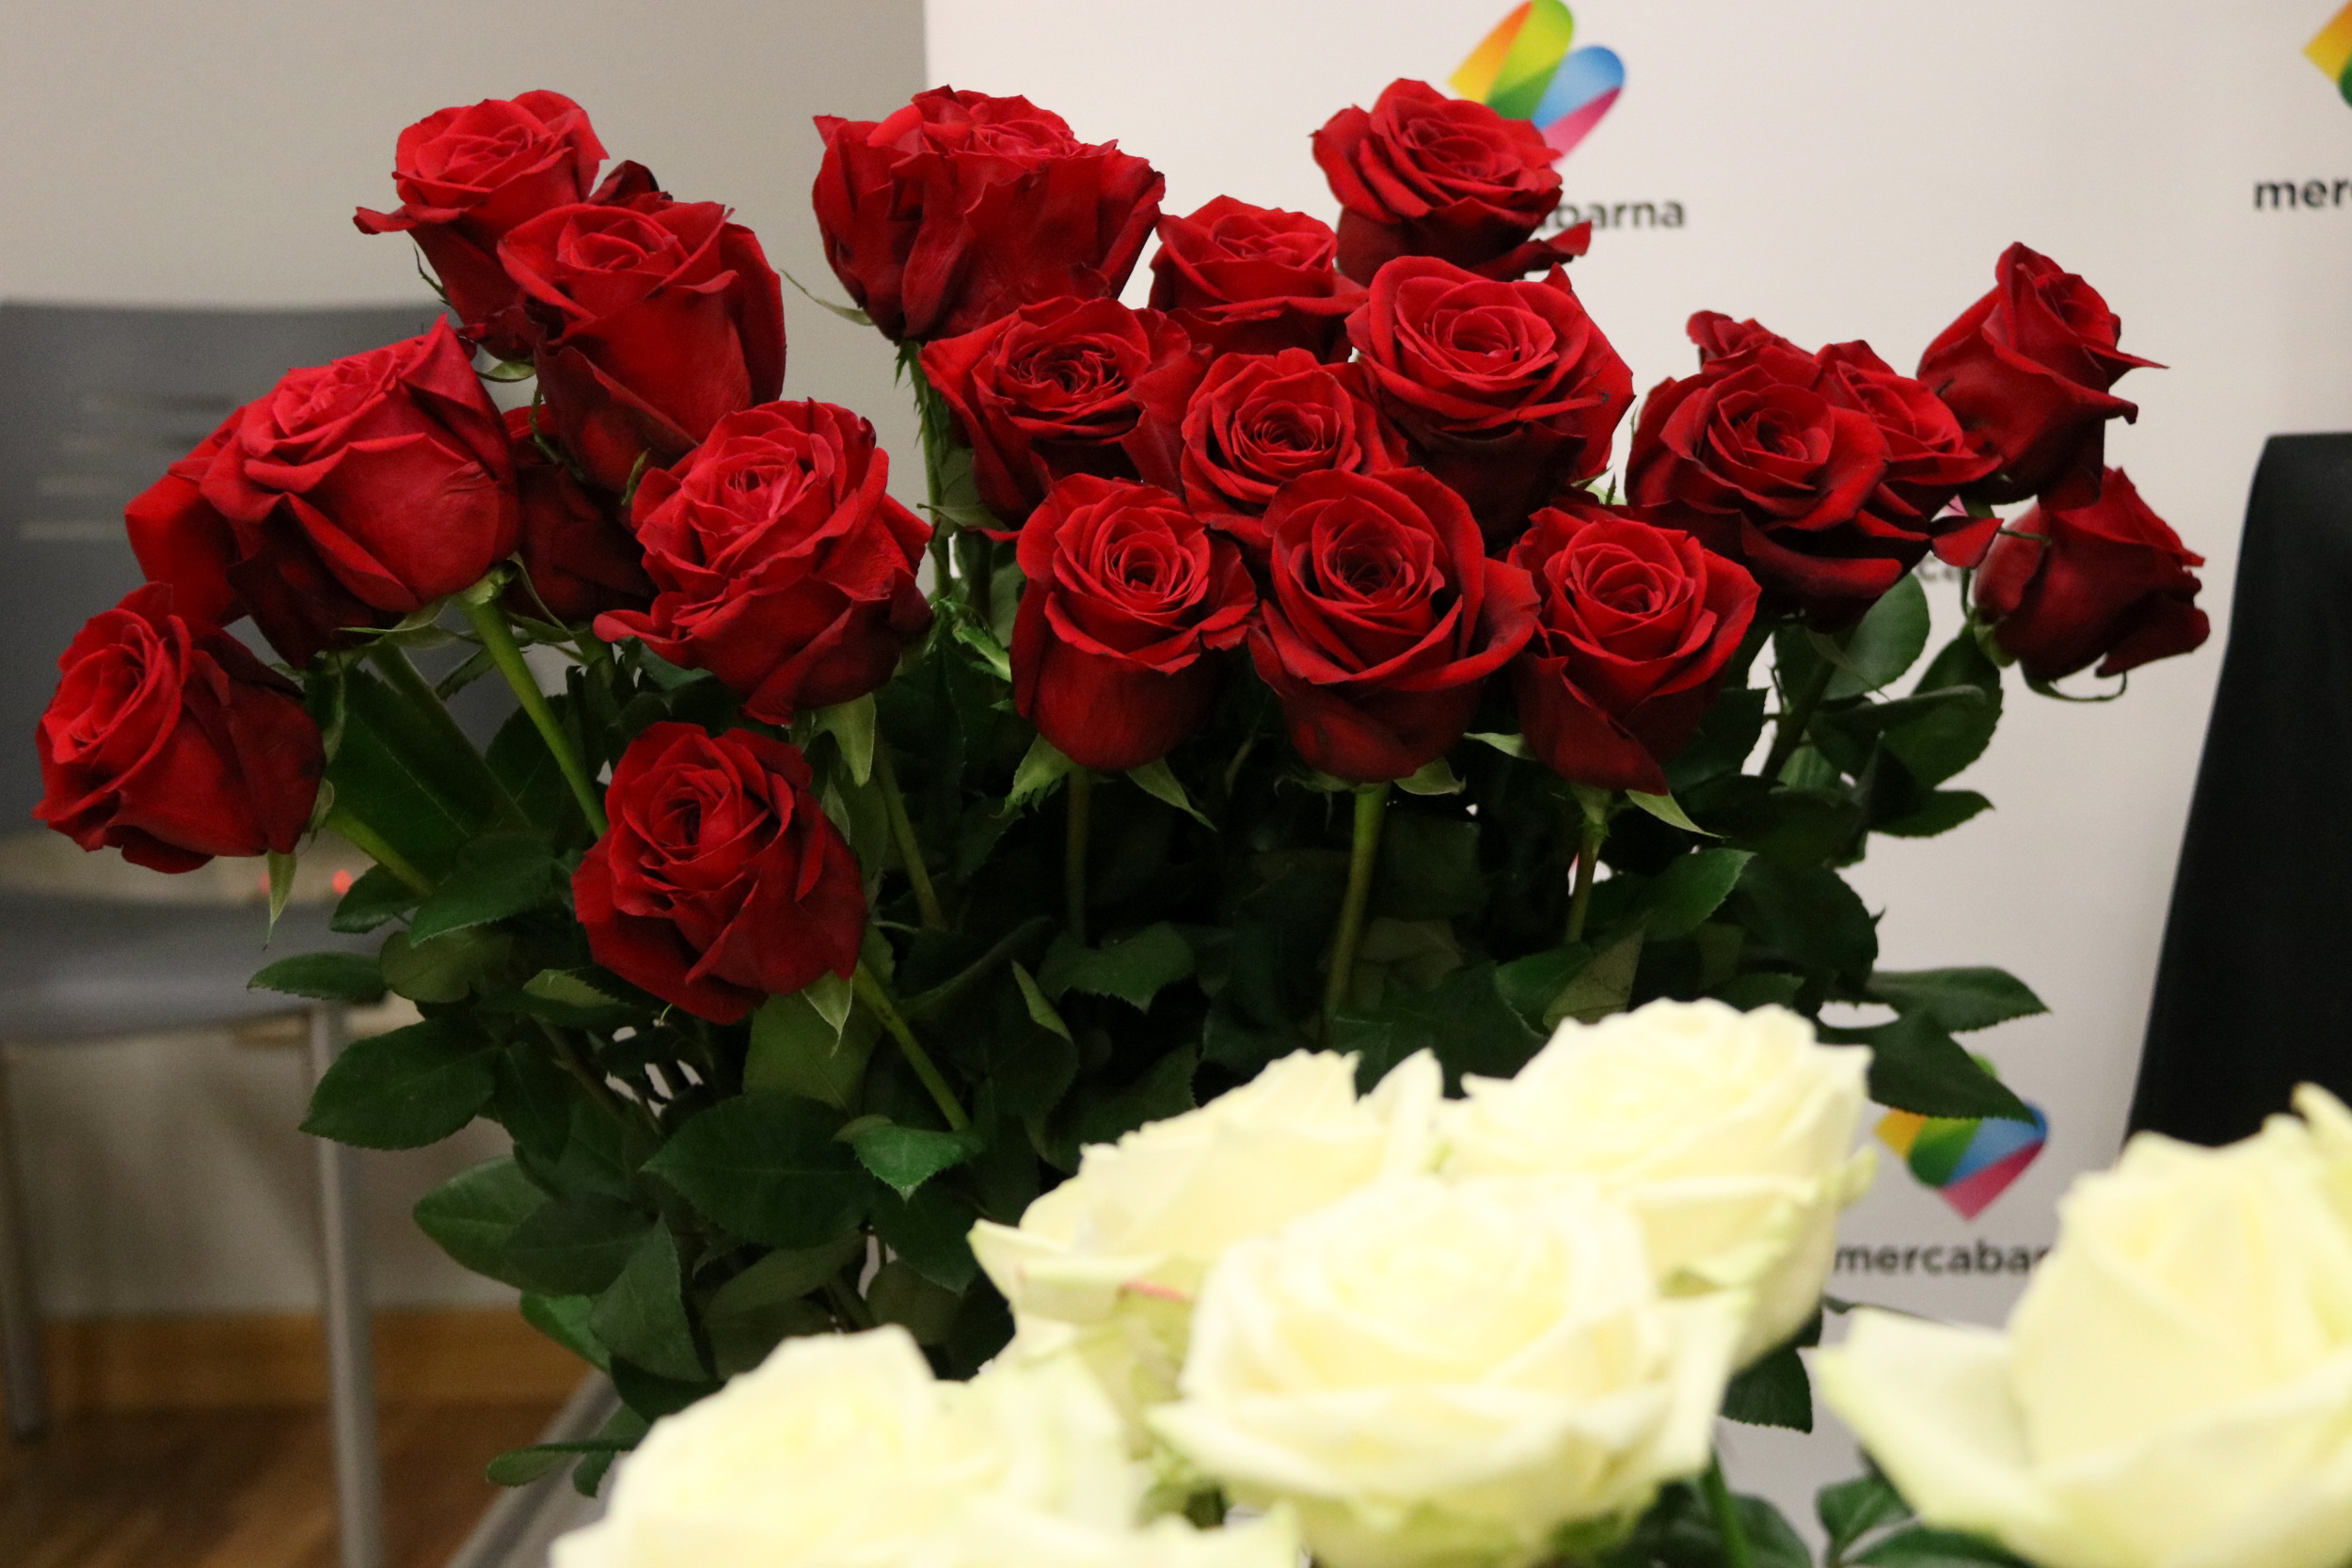 A bouquet of 'Freedom' red roses and white flowers on the foreground (by ACN)